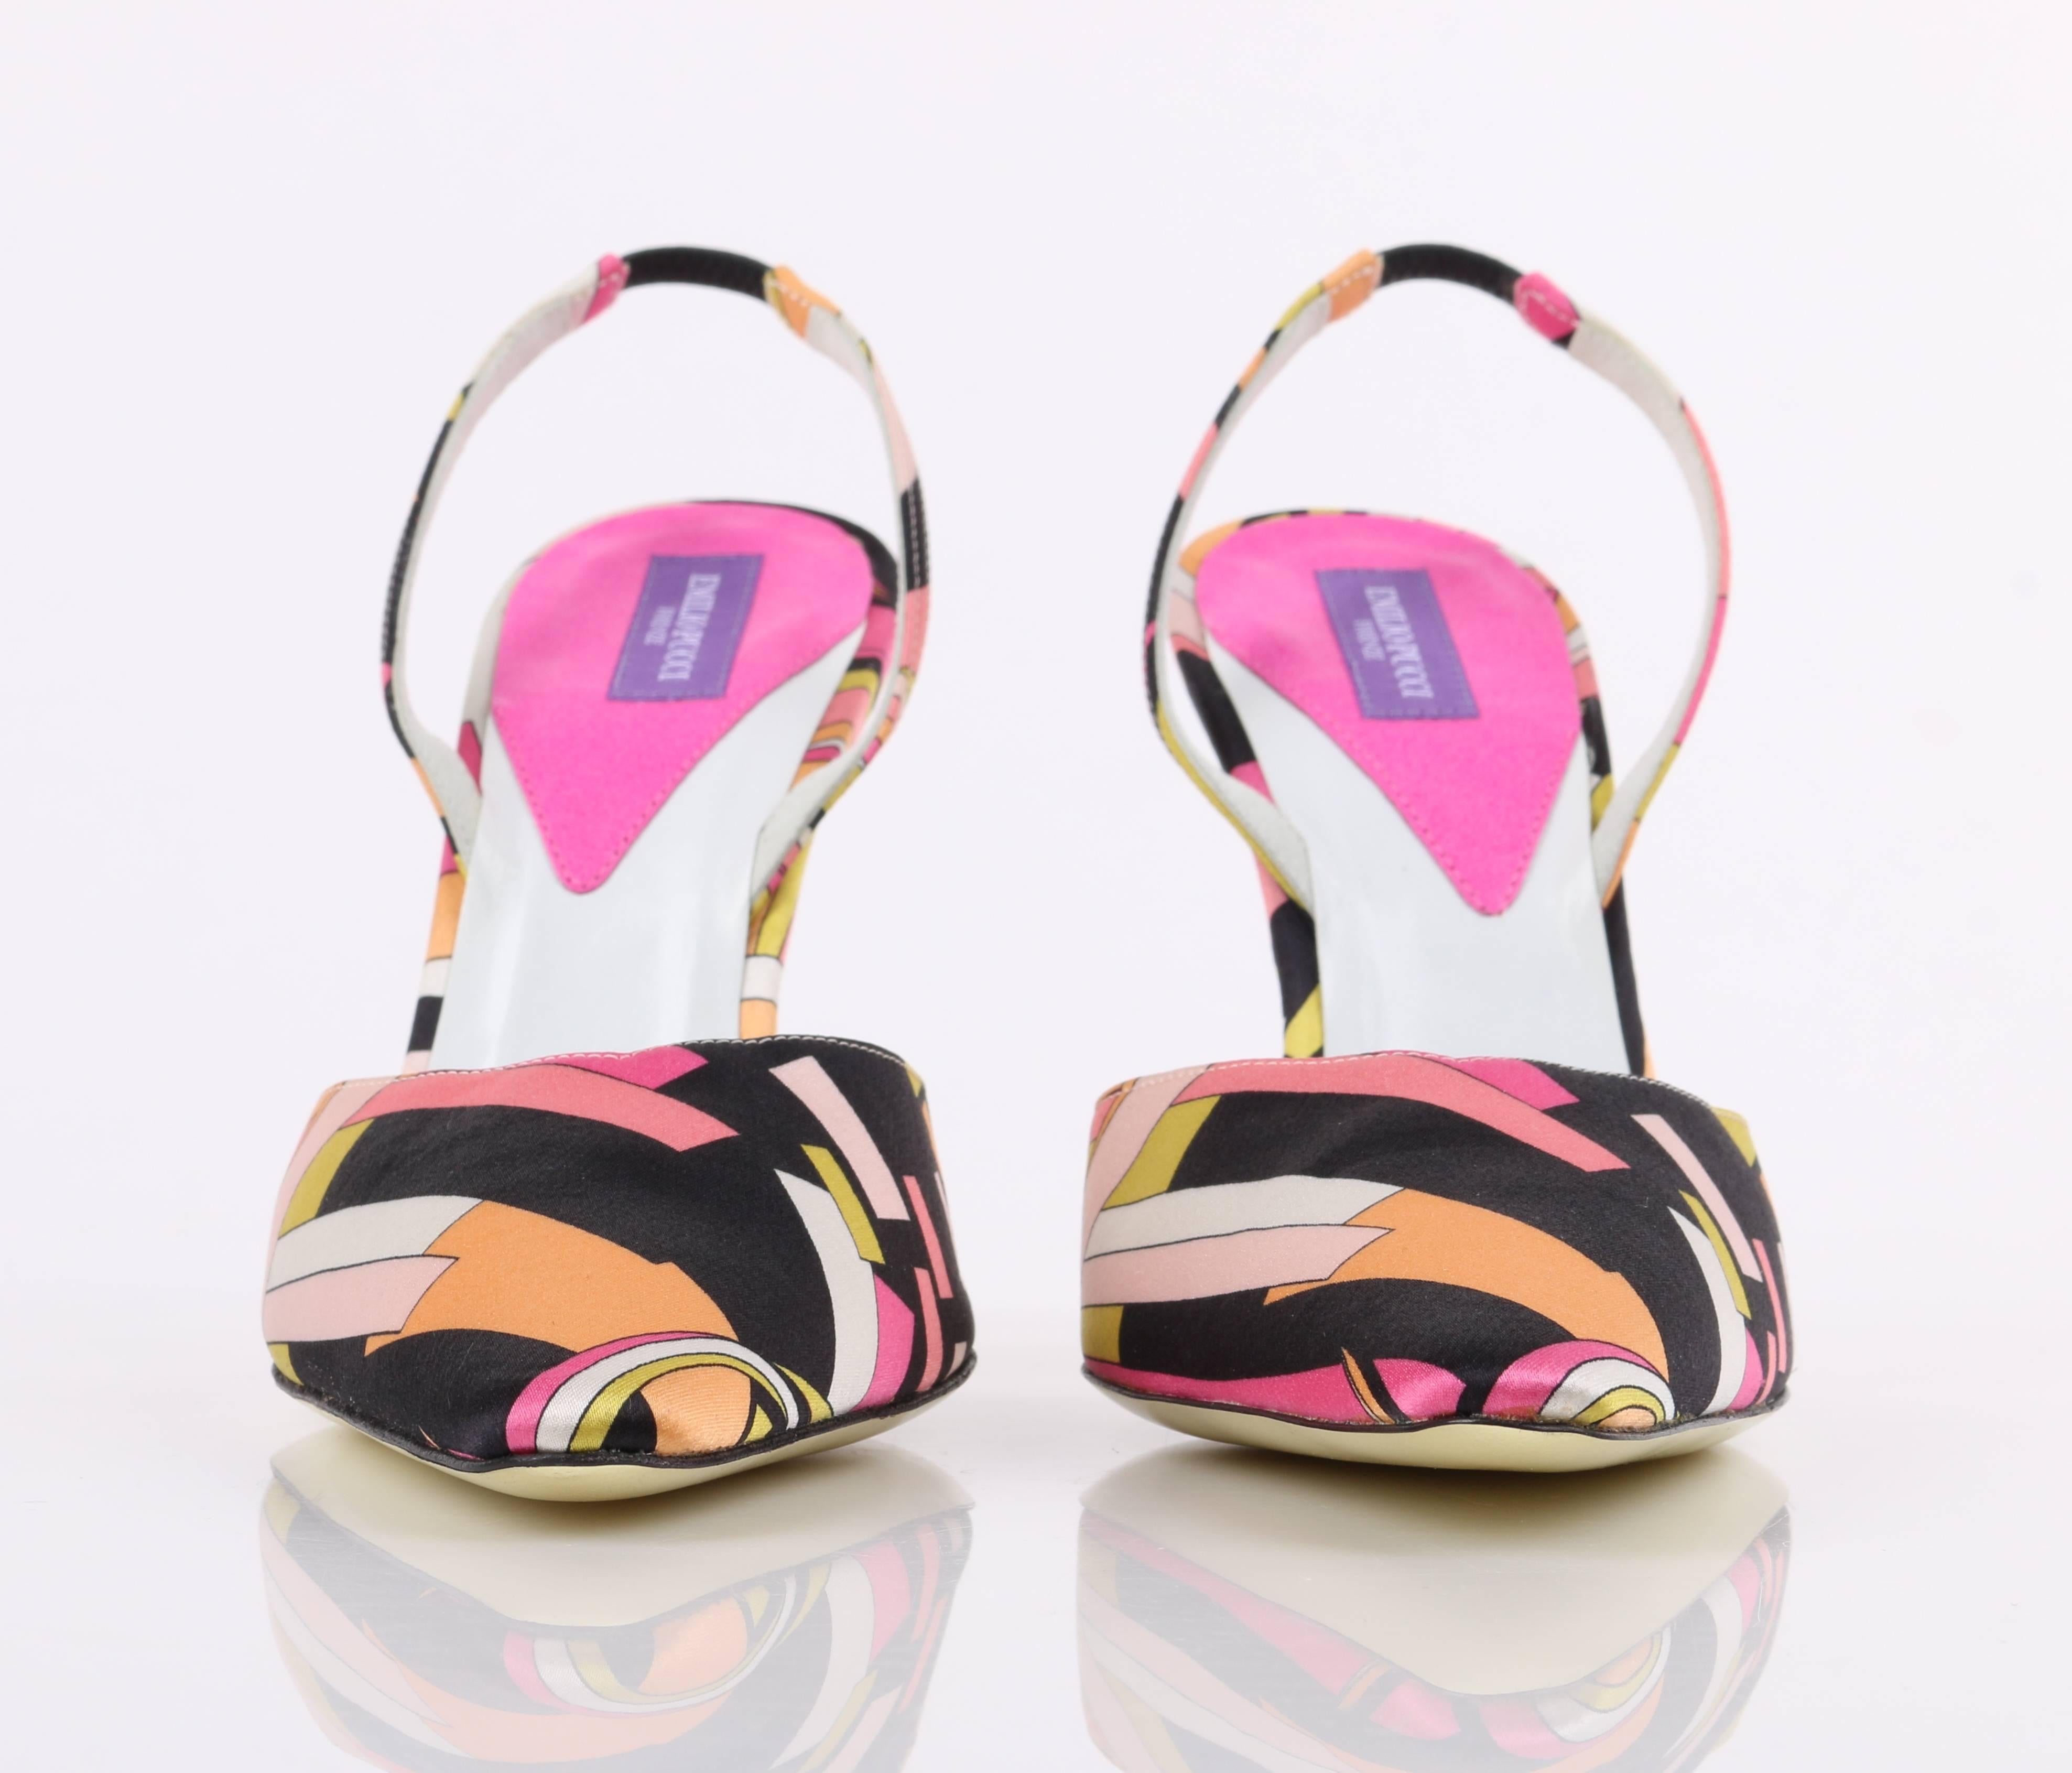 EMILIO PUCCI S/S 2005 Geometric Print Satin Pointed Toe Sling Back Gold Pumps 2